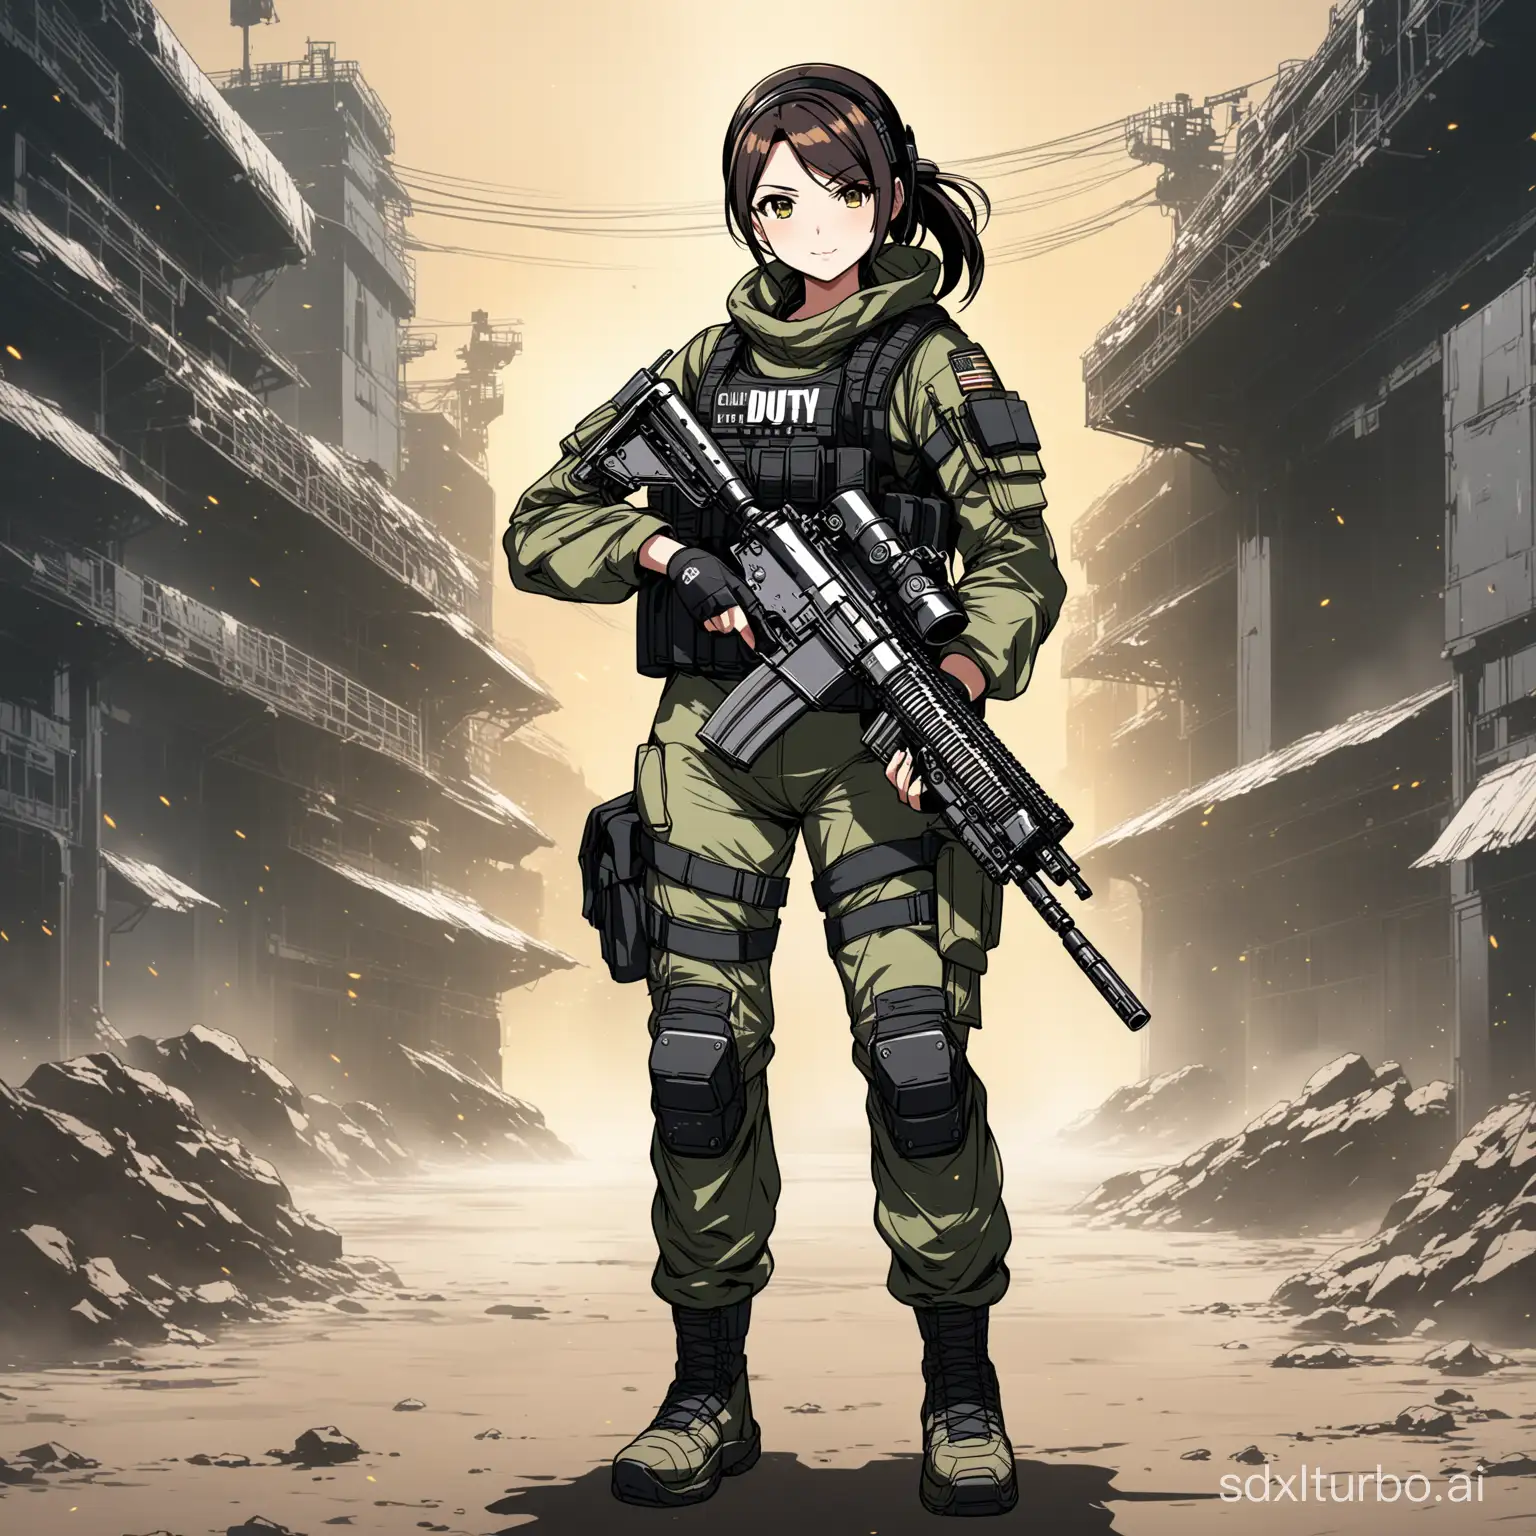 Futuristic-Anime-Art-Tactical-Armored-Girl-in-Call-of-Duty-Style